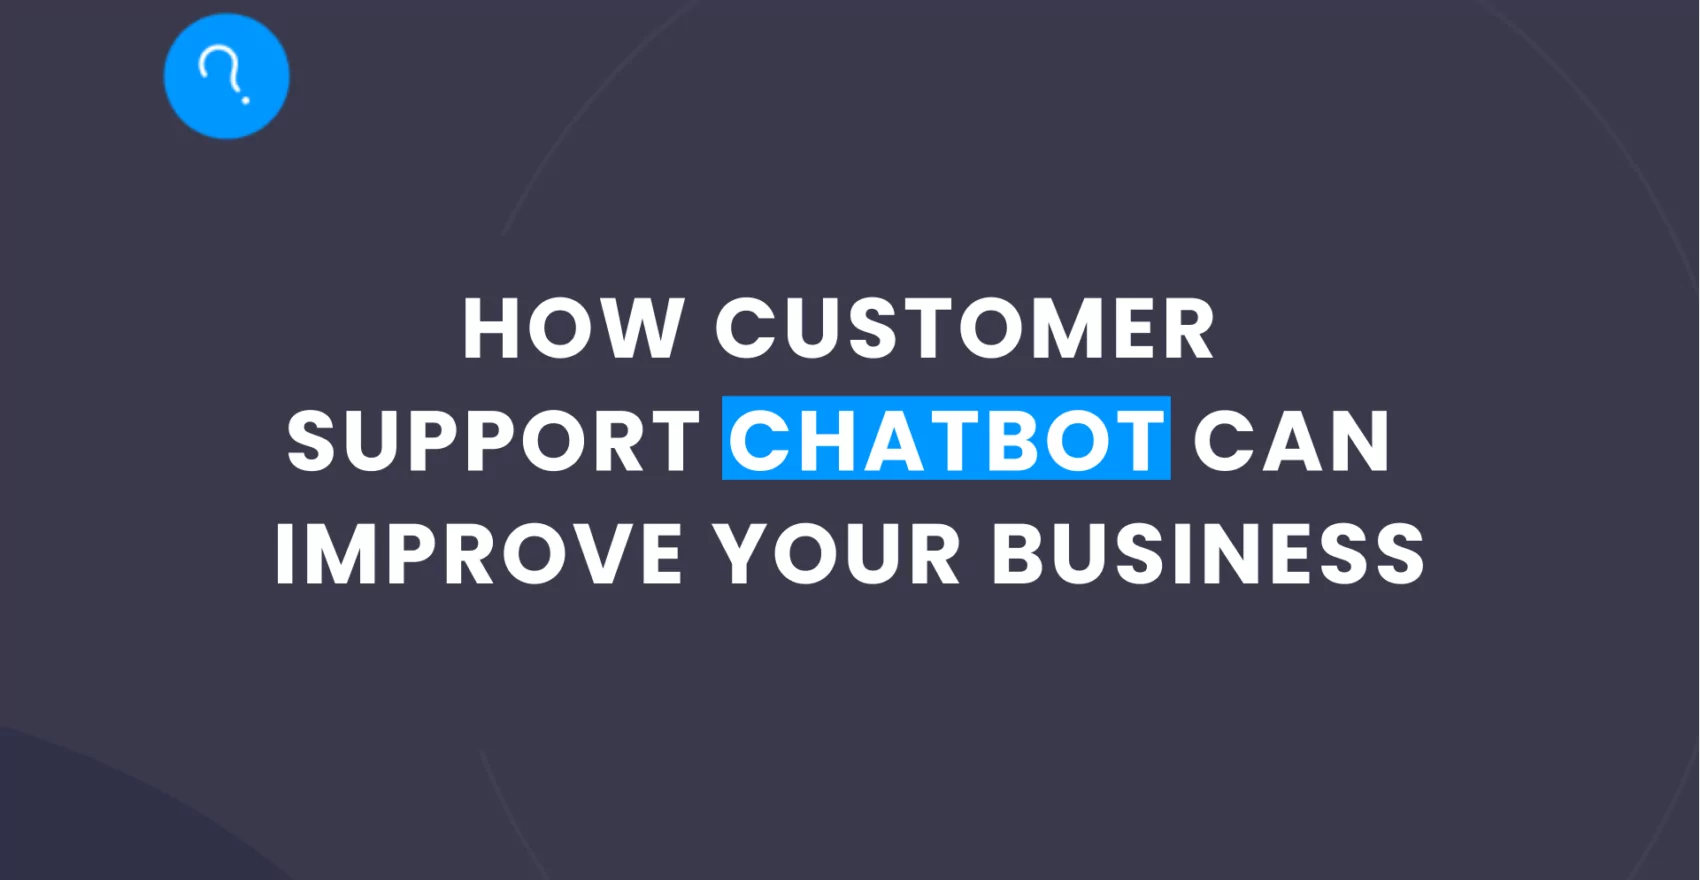 How Customer Support Chatbot Can Improve Your Business